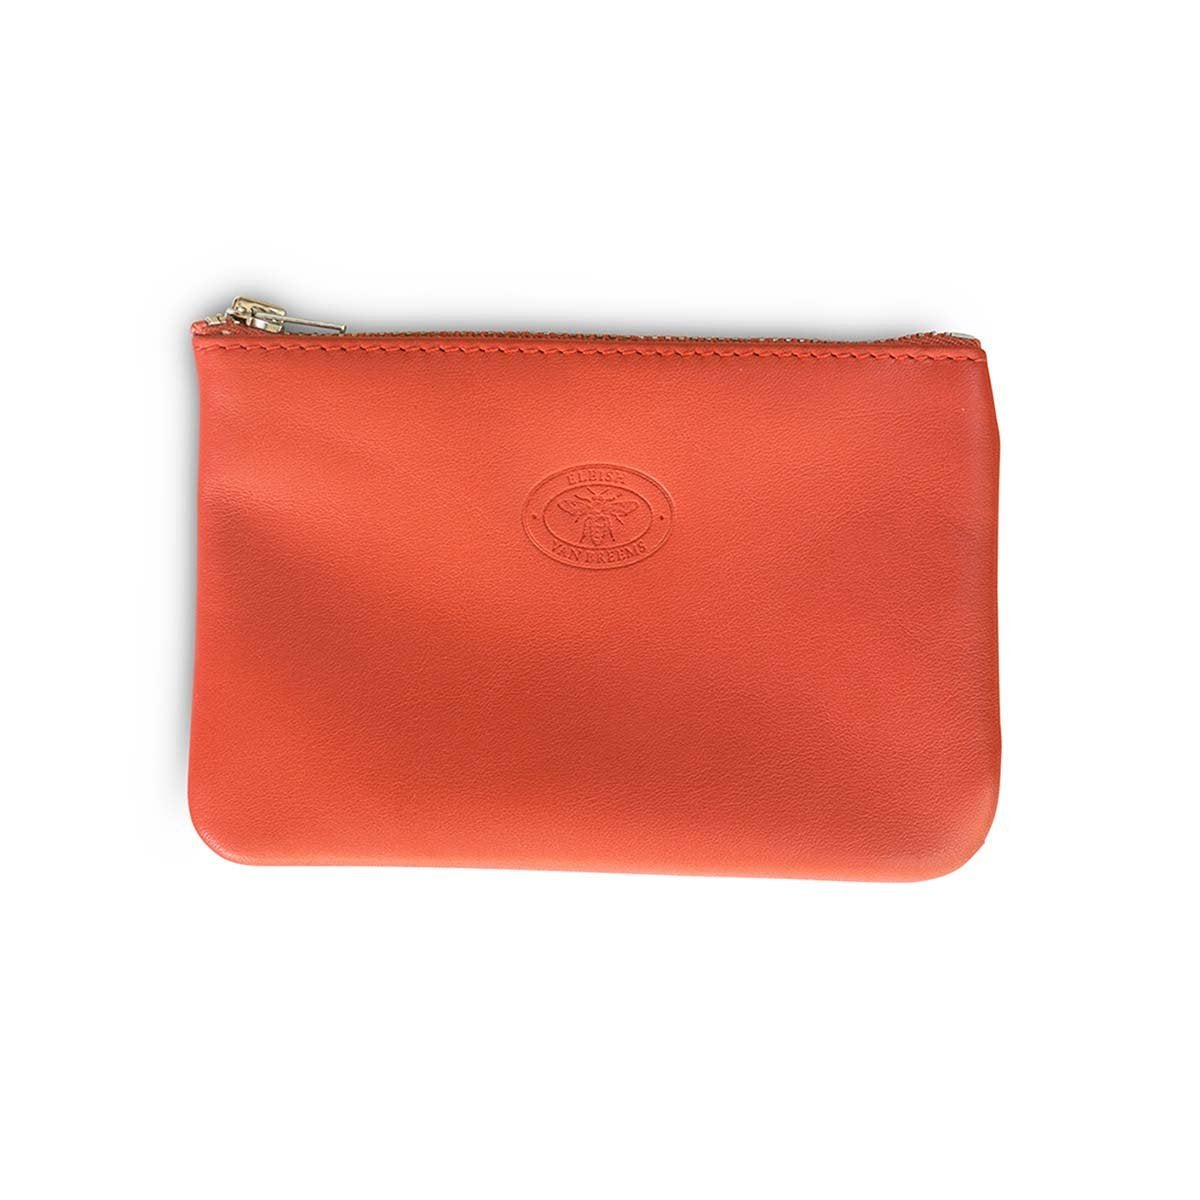 Folly Small Leather Pouch Clutch